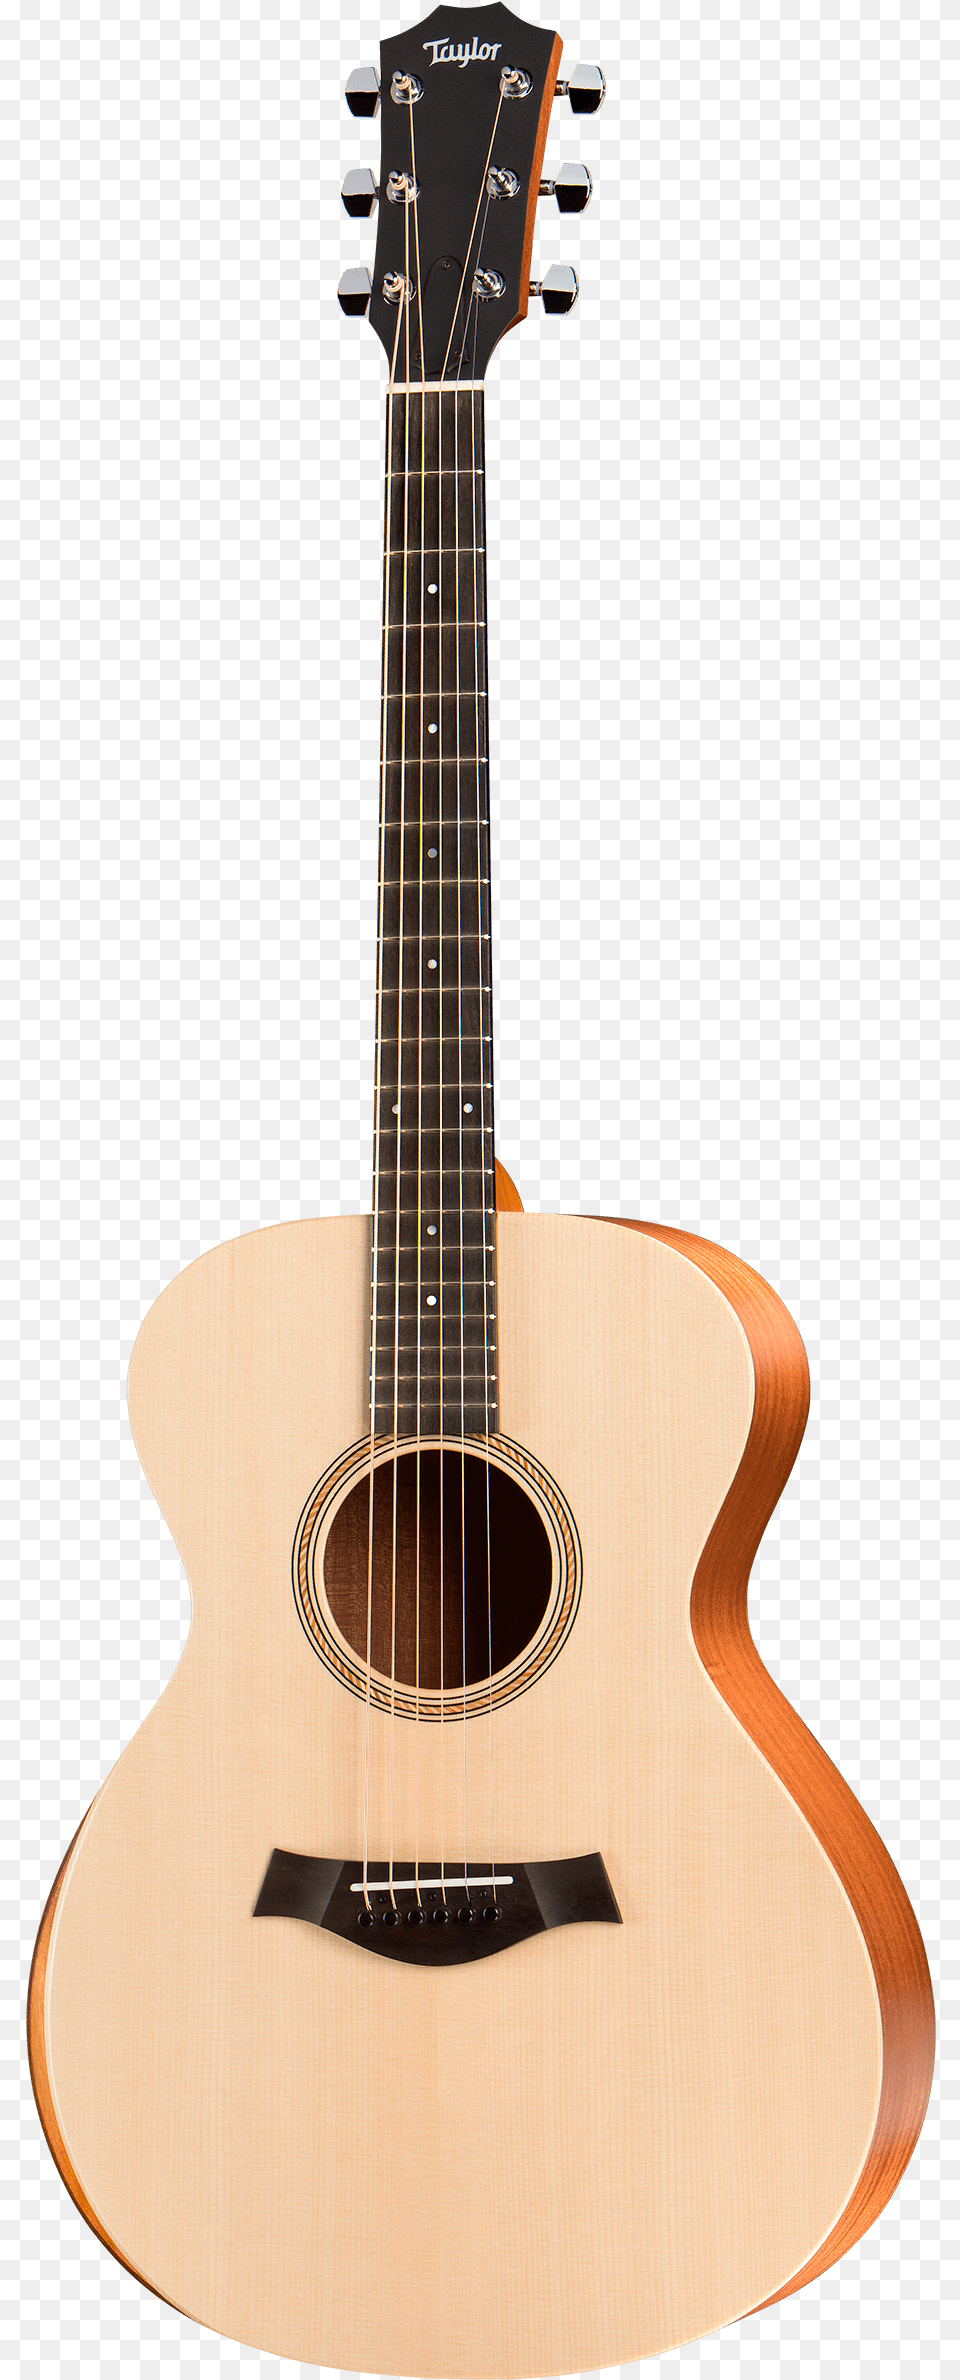 Graphic Download Drawing Guitars Pen Taylor, Guitar, Musical Instrument Png